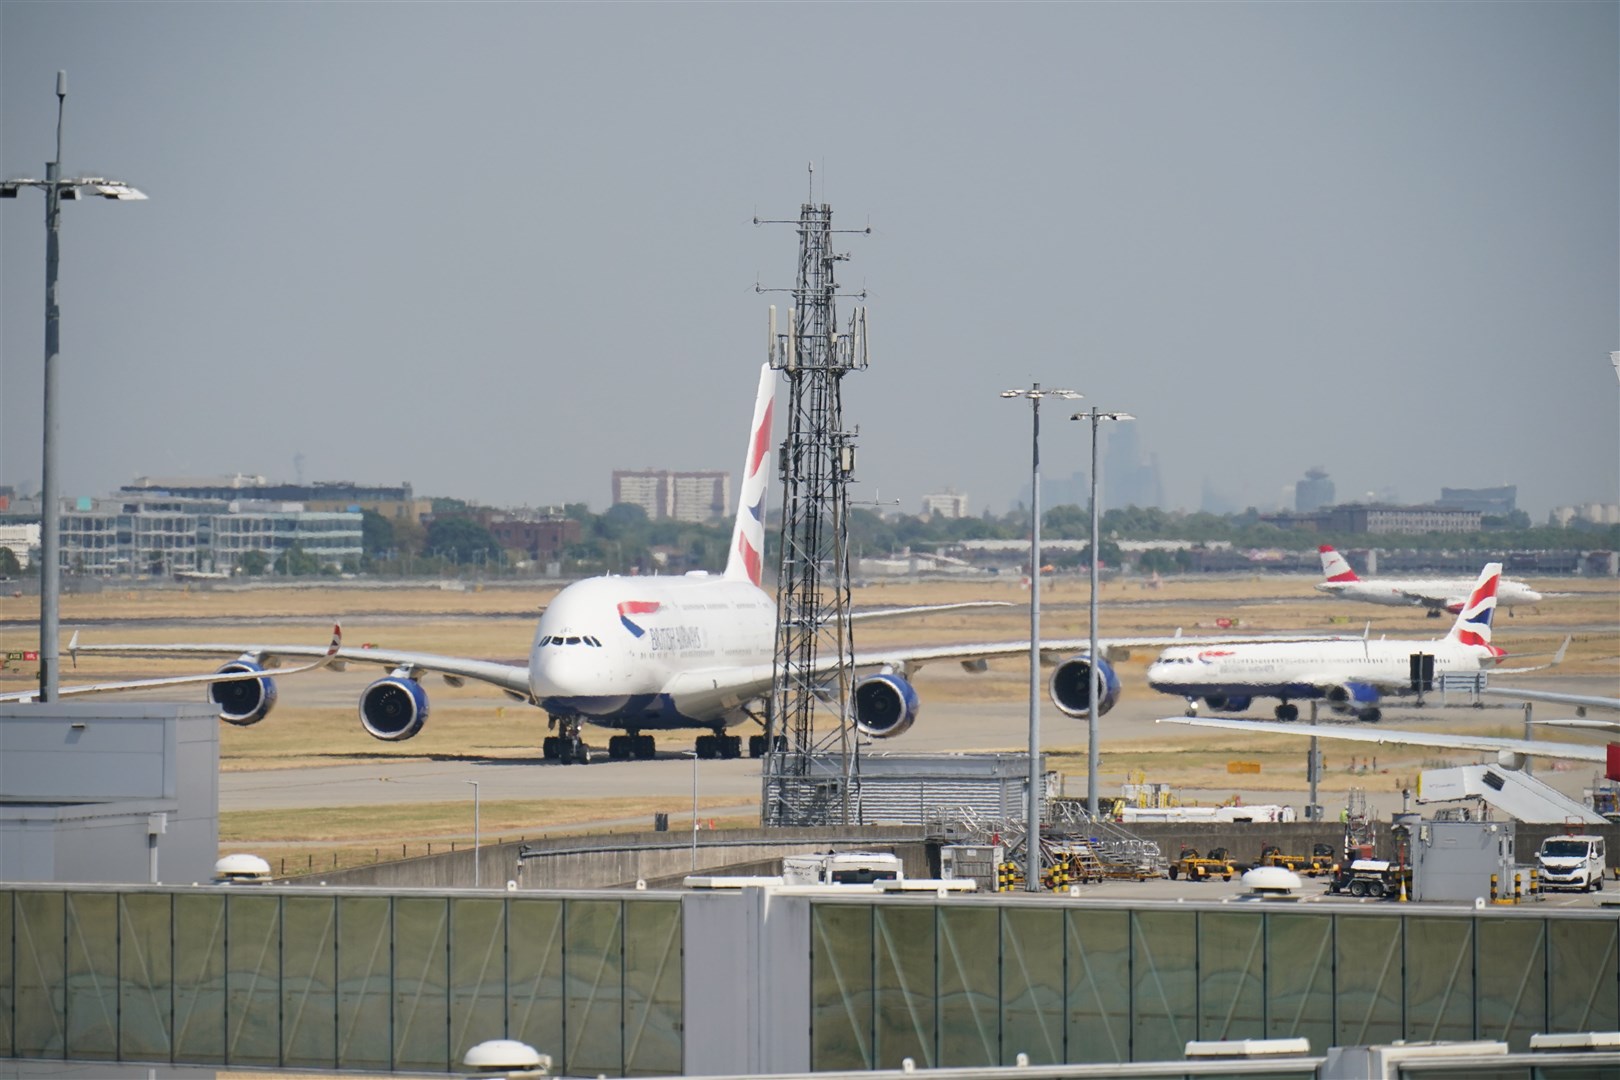 The couple were arrested at Heathrow Airport on June 21 after arriving on a flight from Turkey (PA)